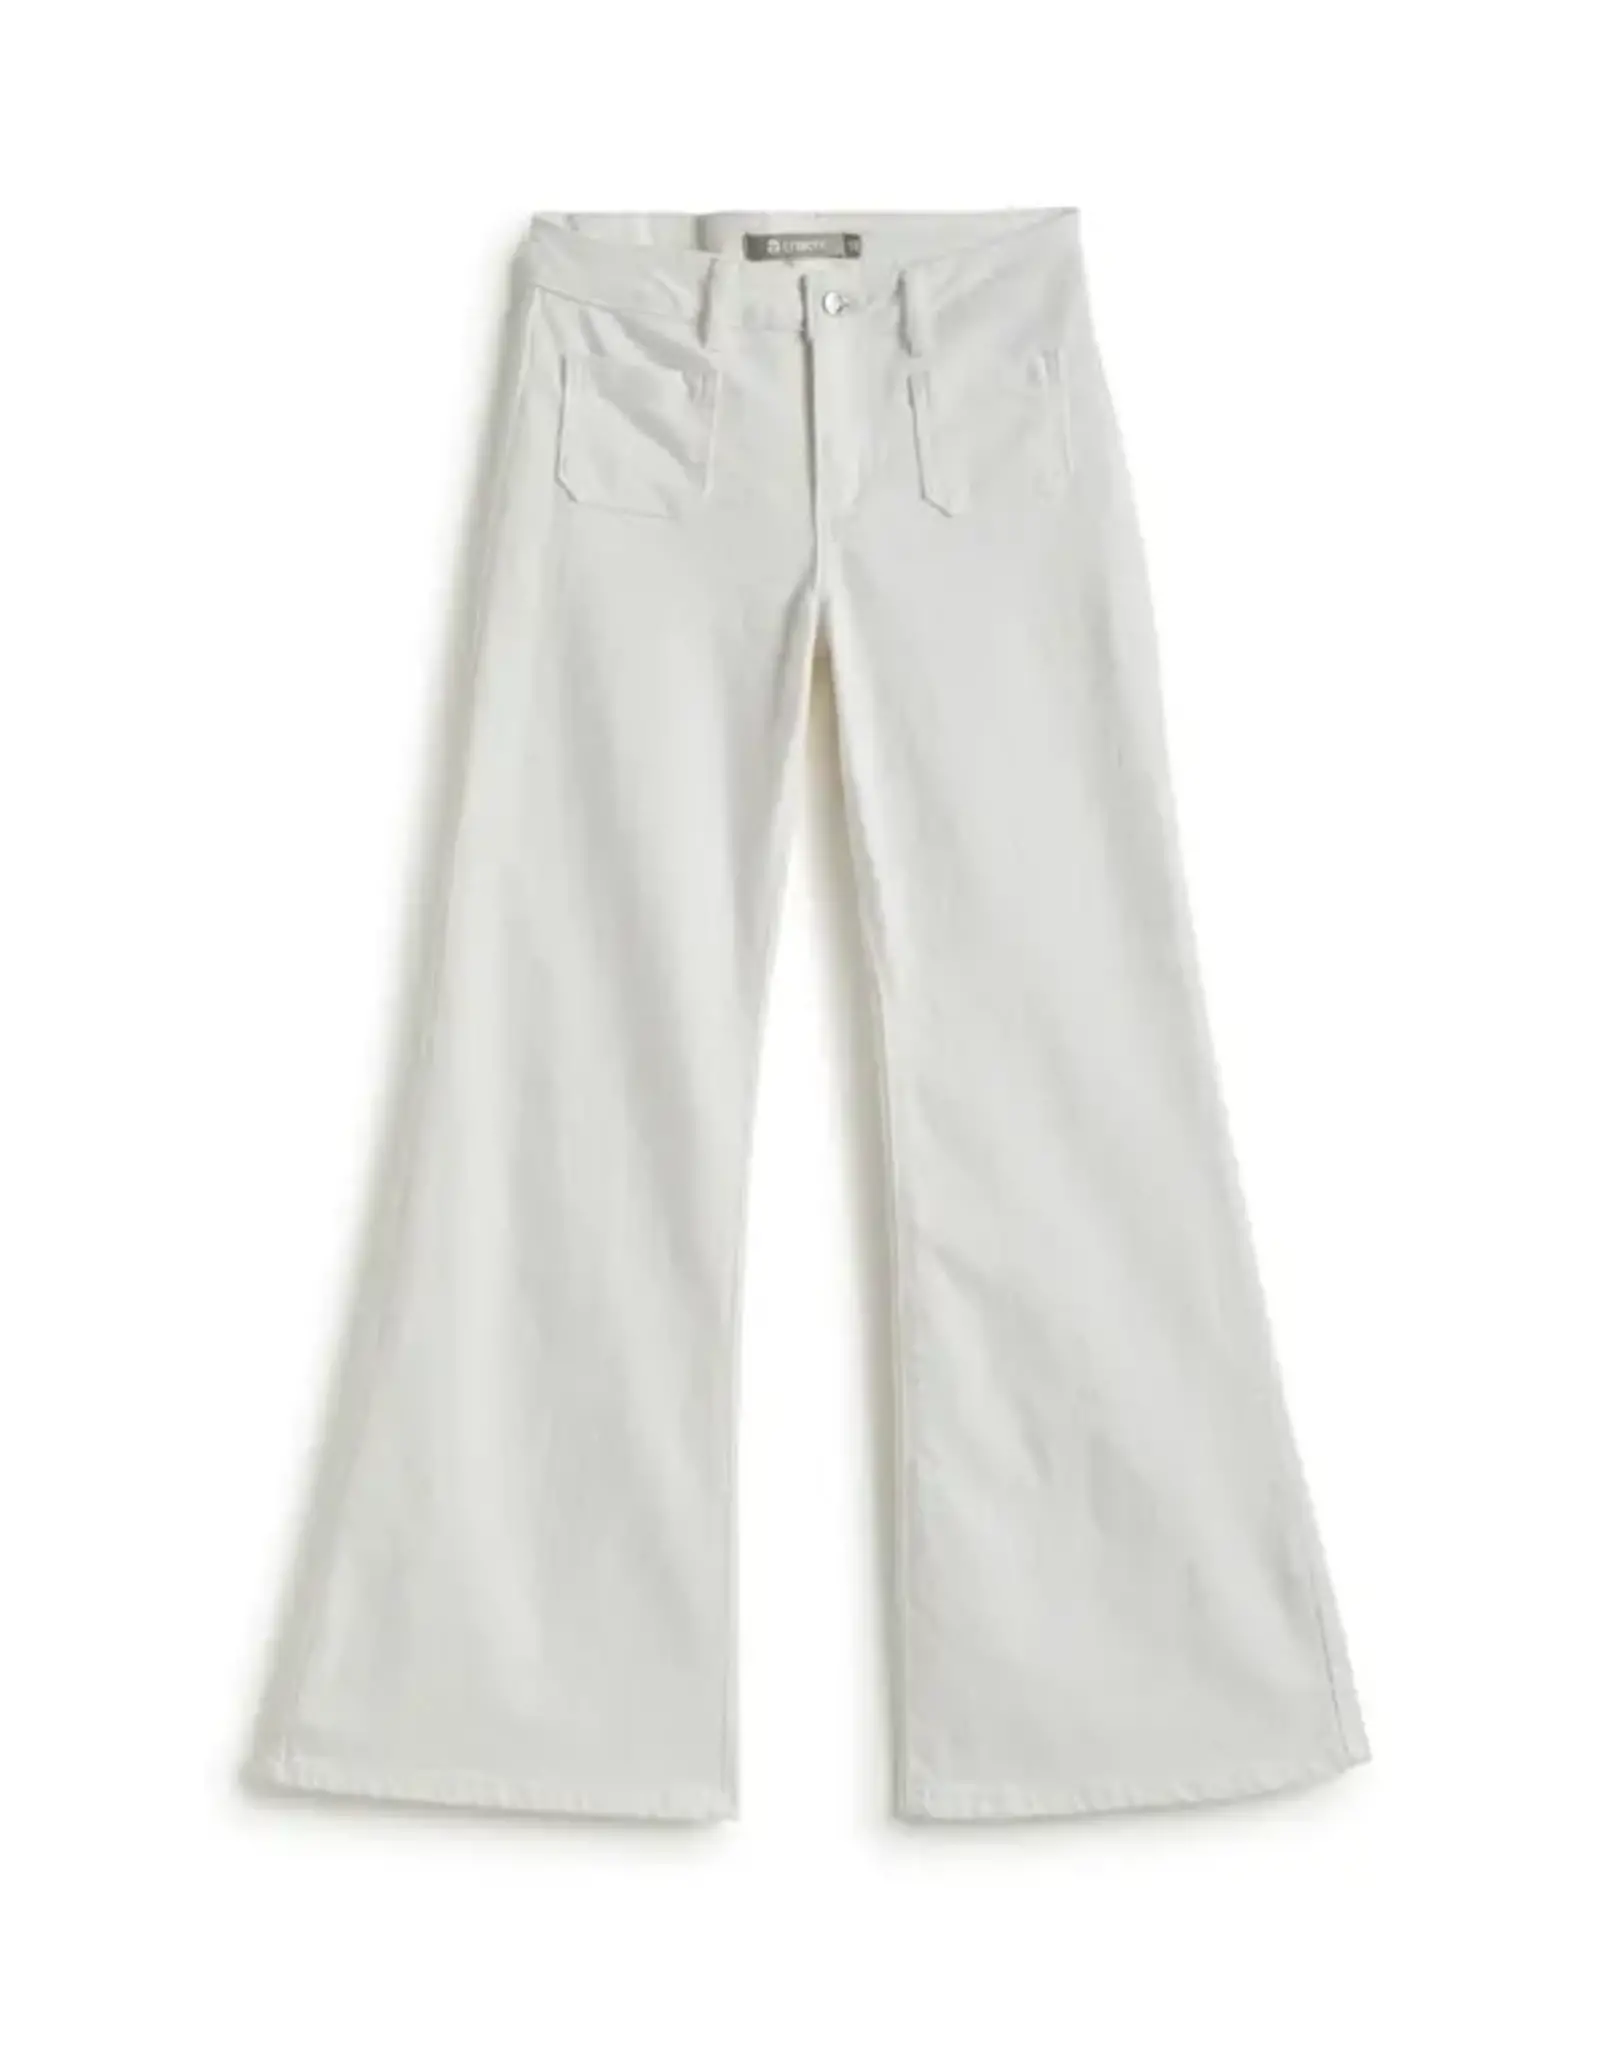 Tractr Patch Pocket Relax Flare Jean in White